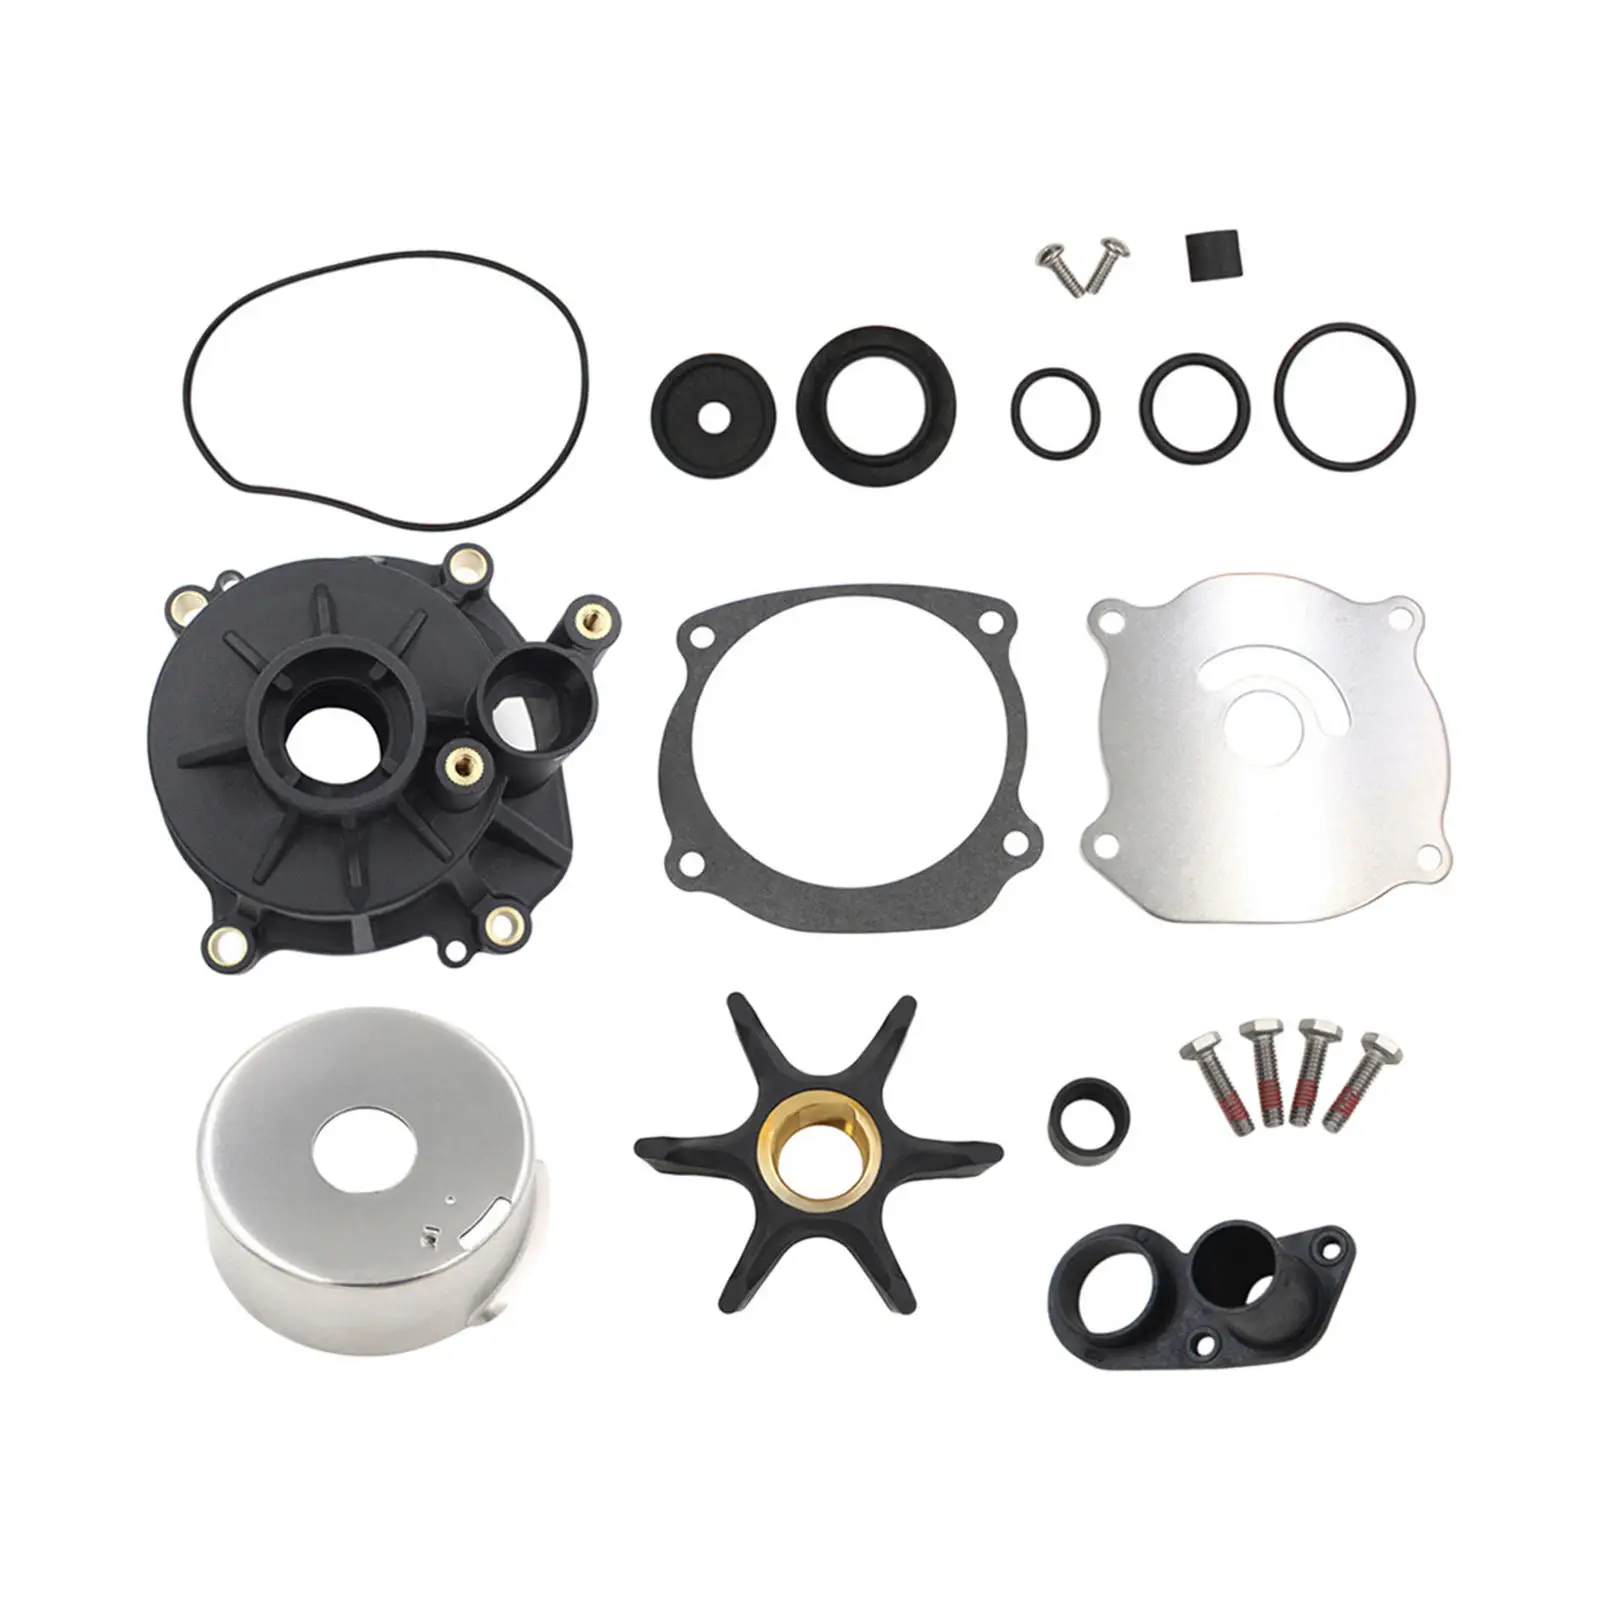 Water Pump Kit fits for Johnson Evinrude Outboard 5001594 85-300HP, Lightweight High Performance